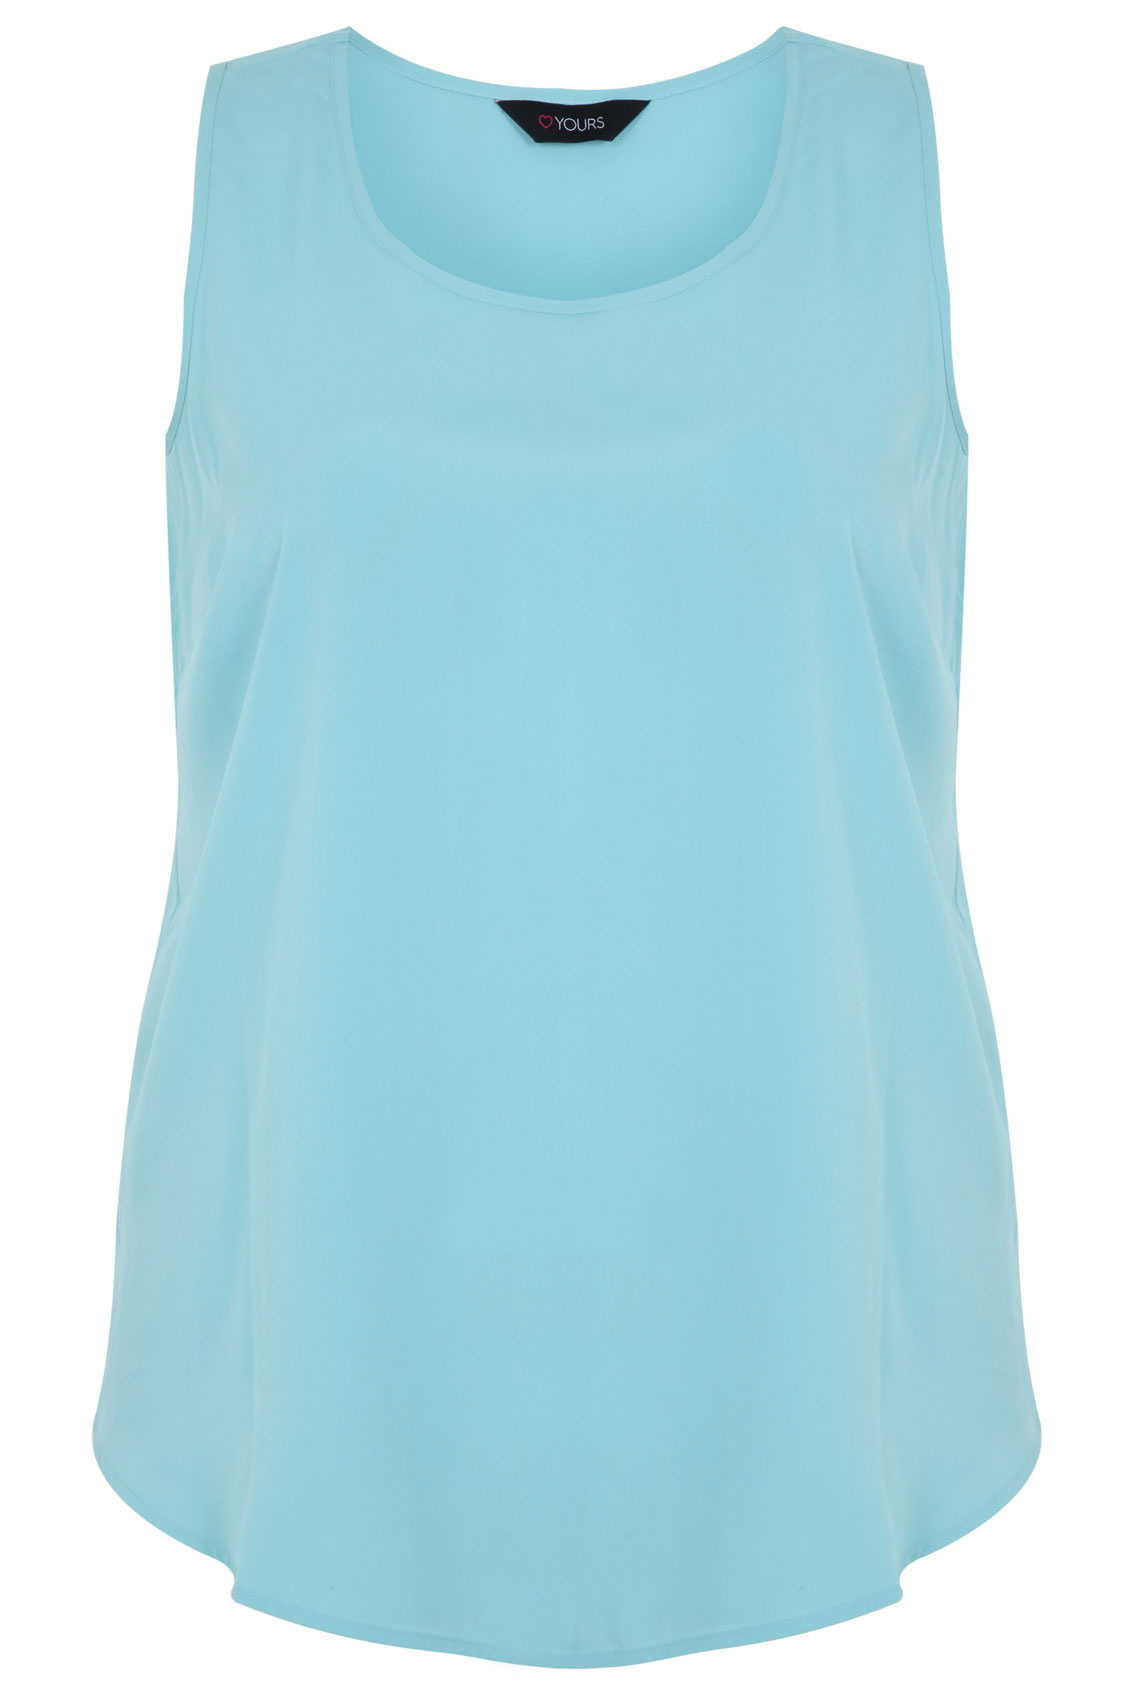 Duck Egg Blue Sleeveless Top With Curved Dipped Hem Plus Size - Yours ...